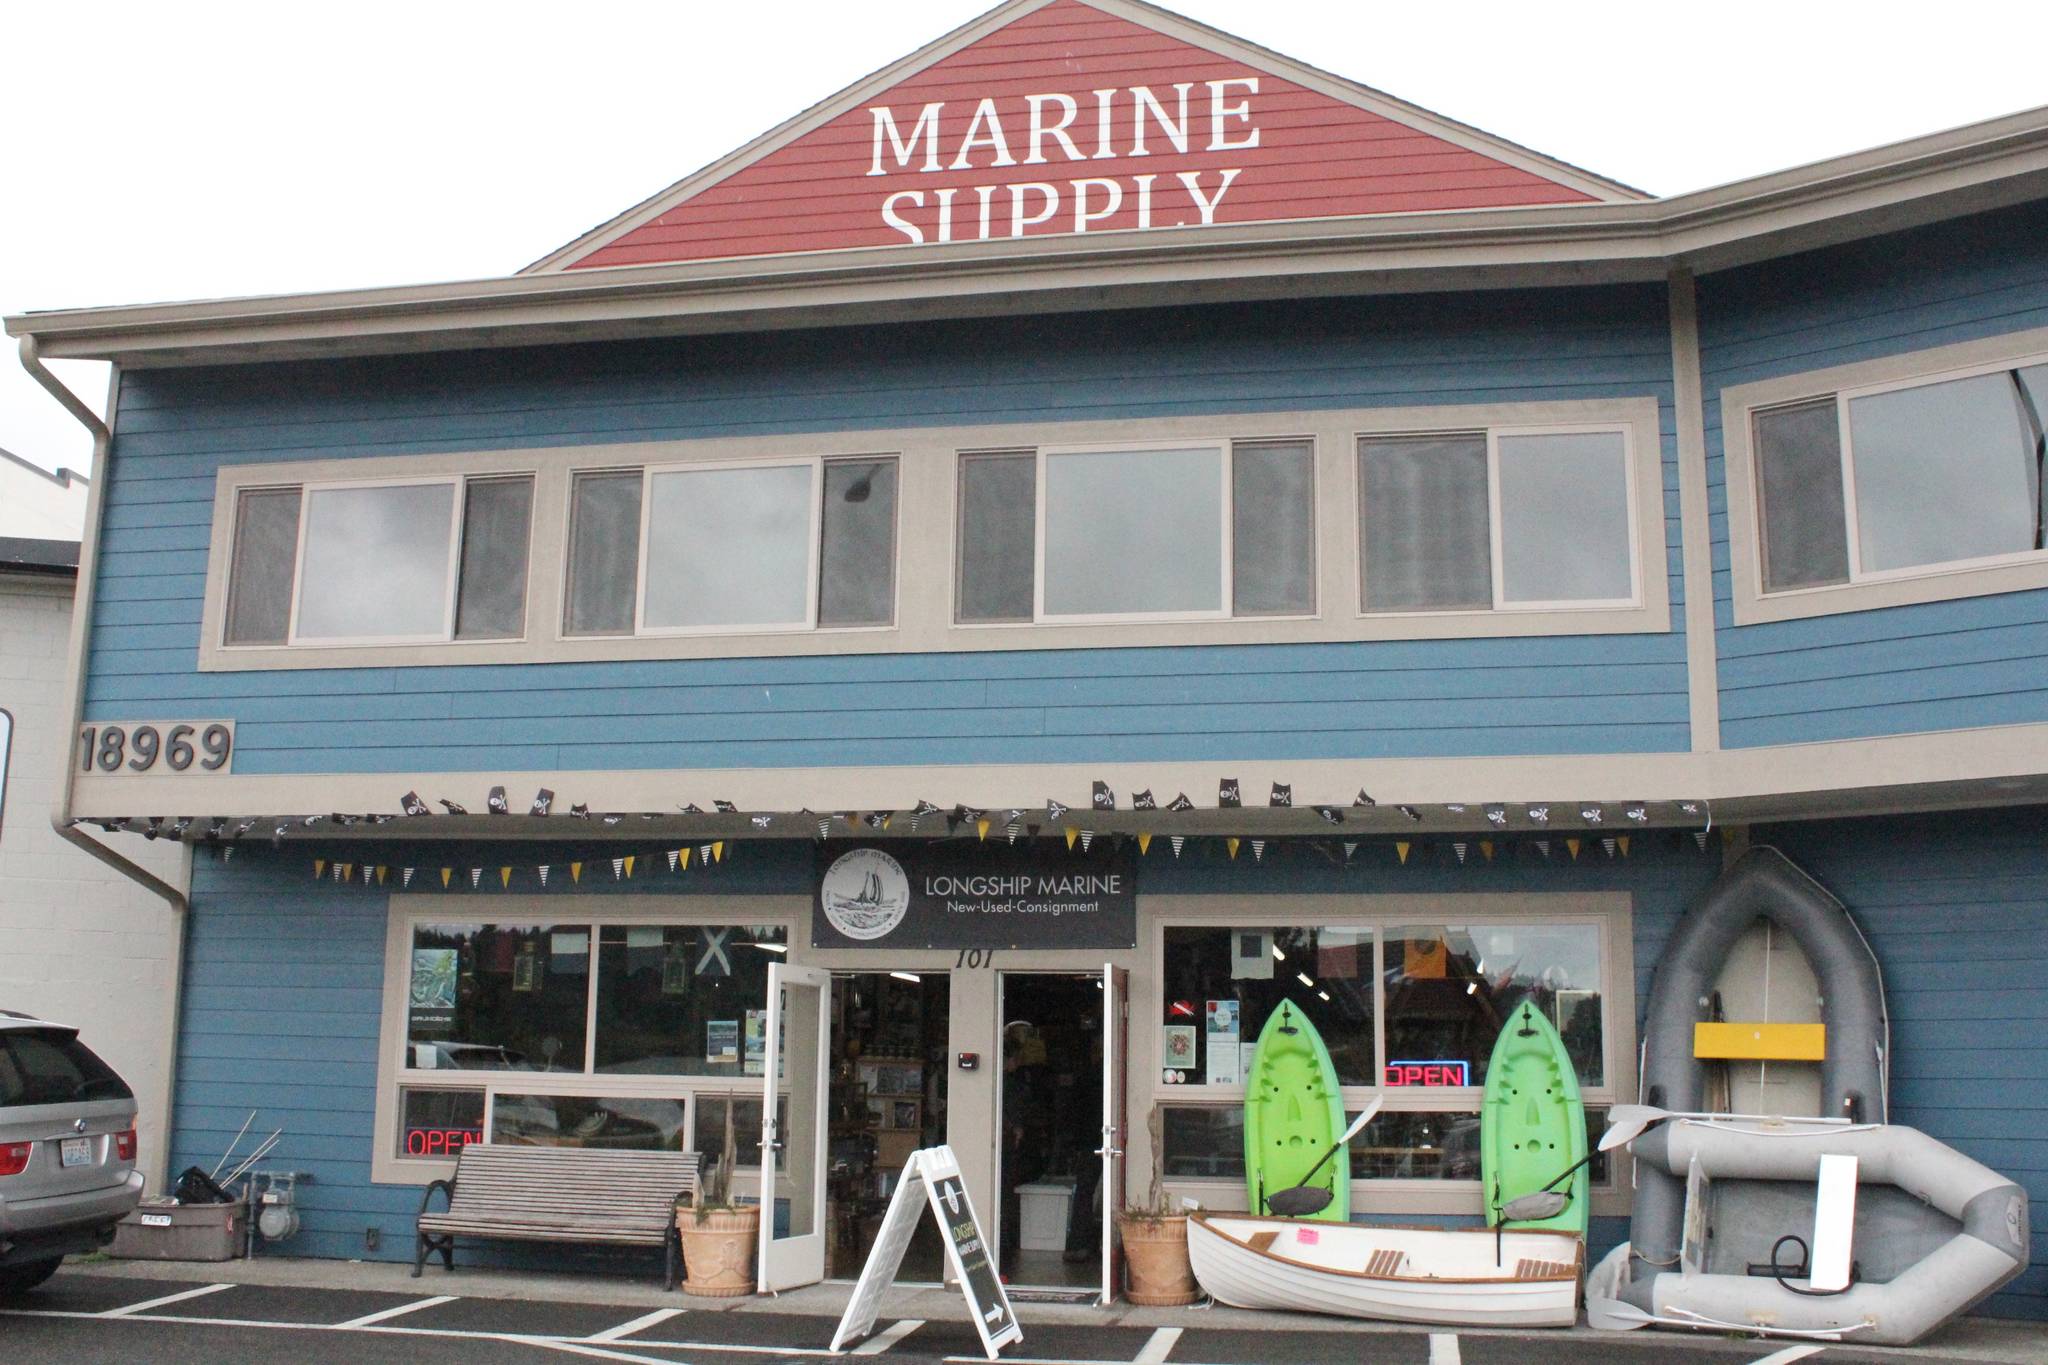 <em>‘Marine Supply’ is now prominently featured on the gable end of Longship Marine’s new building. </em>Nick Twietmeyer/Kitsap News Group